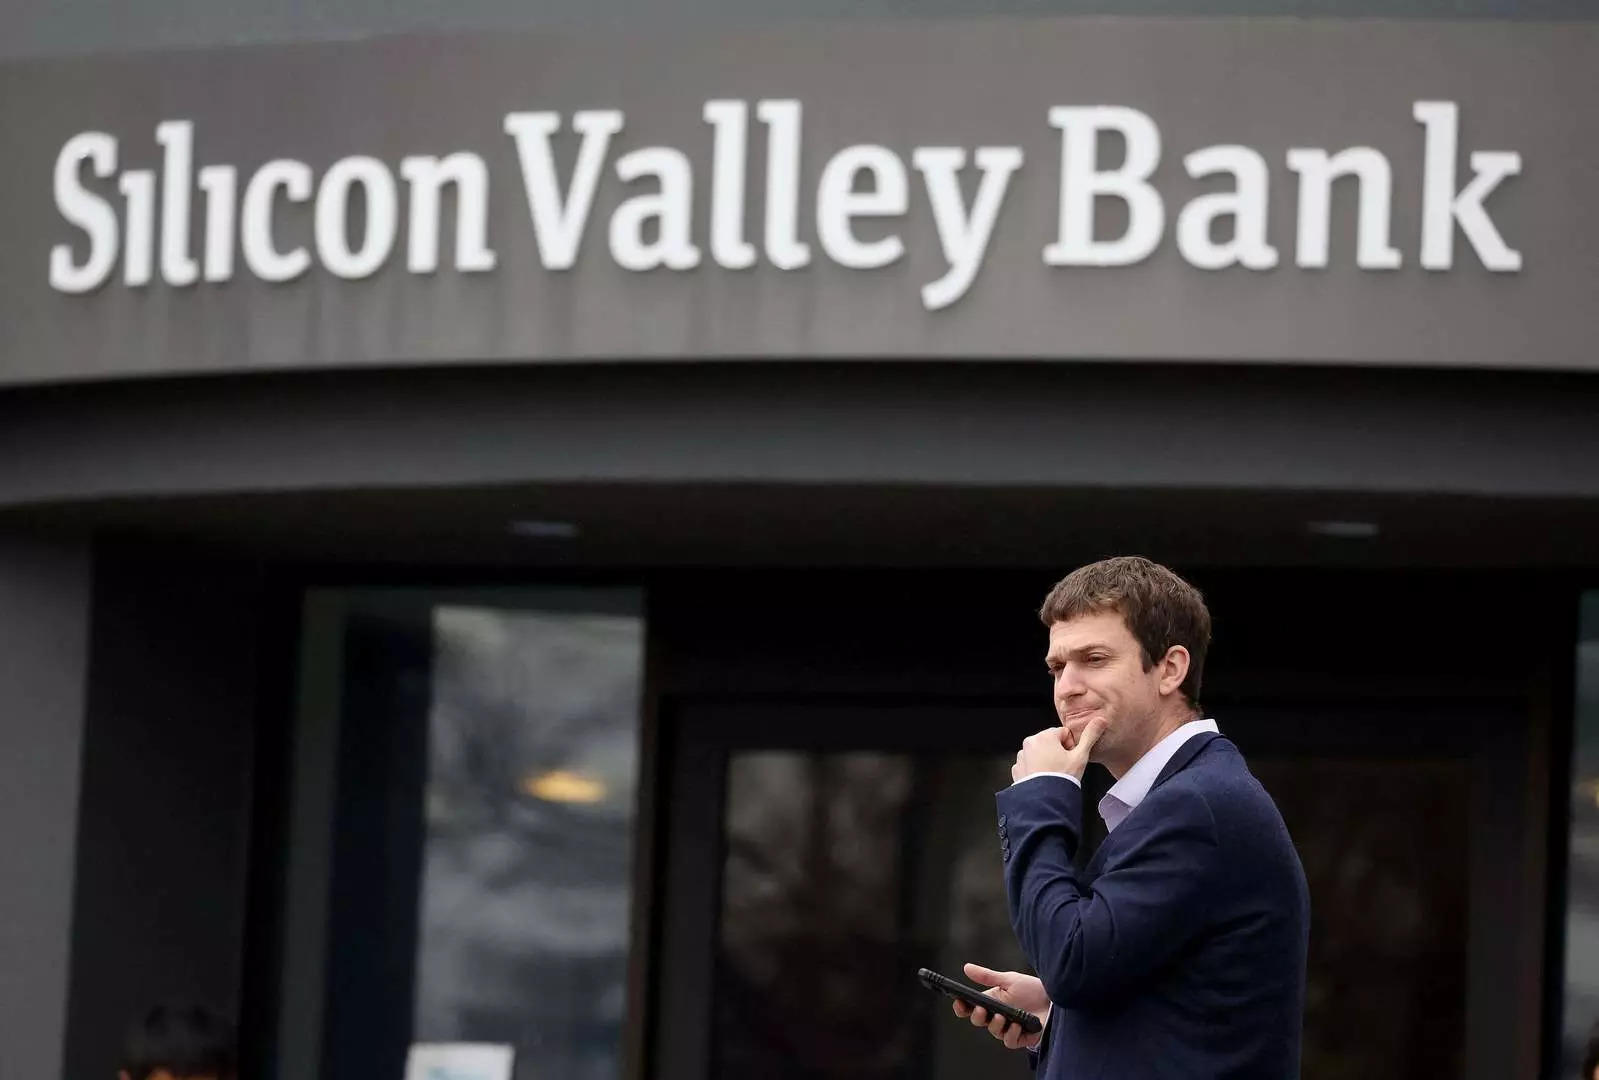 Why did the Silicon Valley Bank fail?